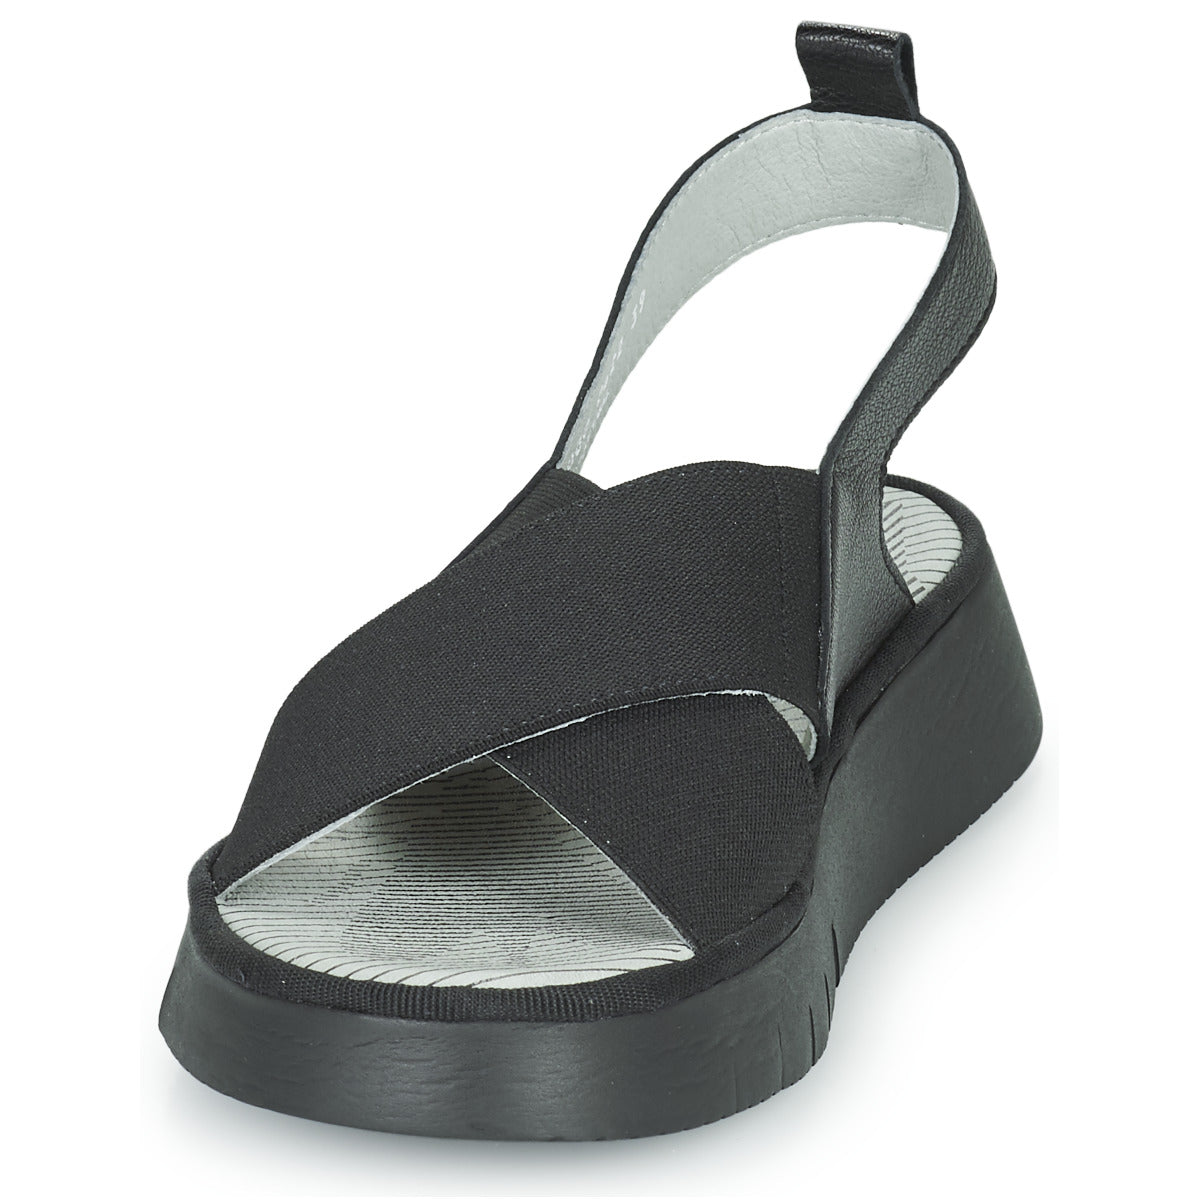 FLY LONDON CAND BLACK - Women Sandals - Collective Shoes 